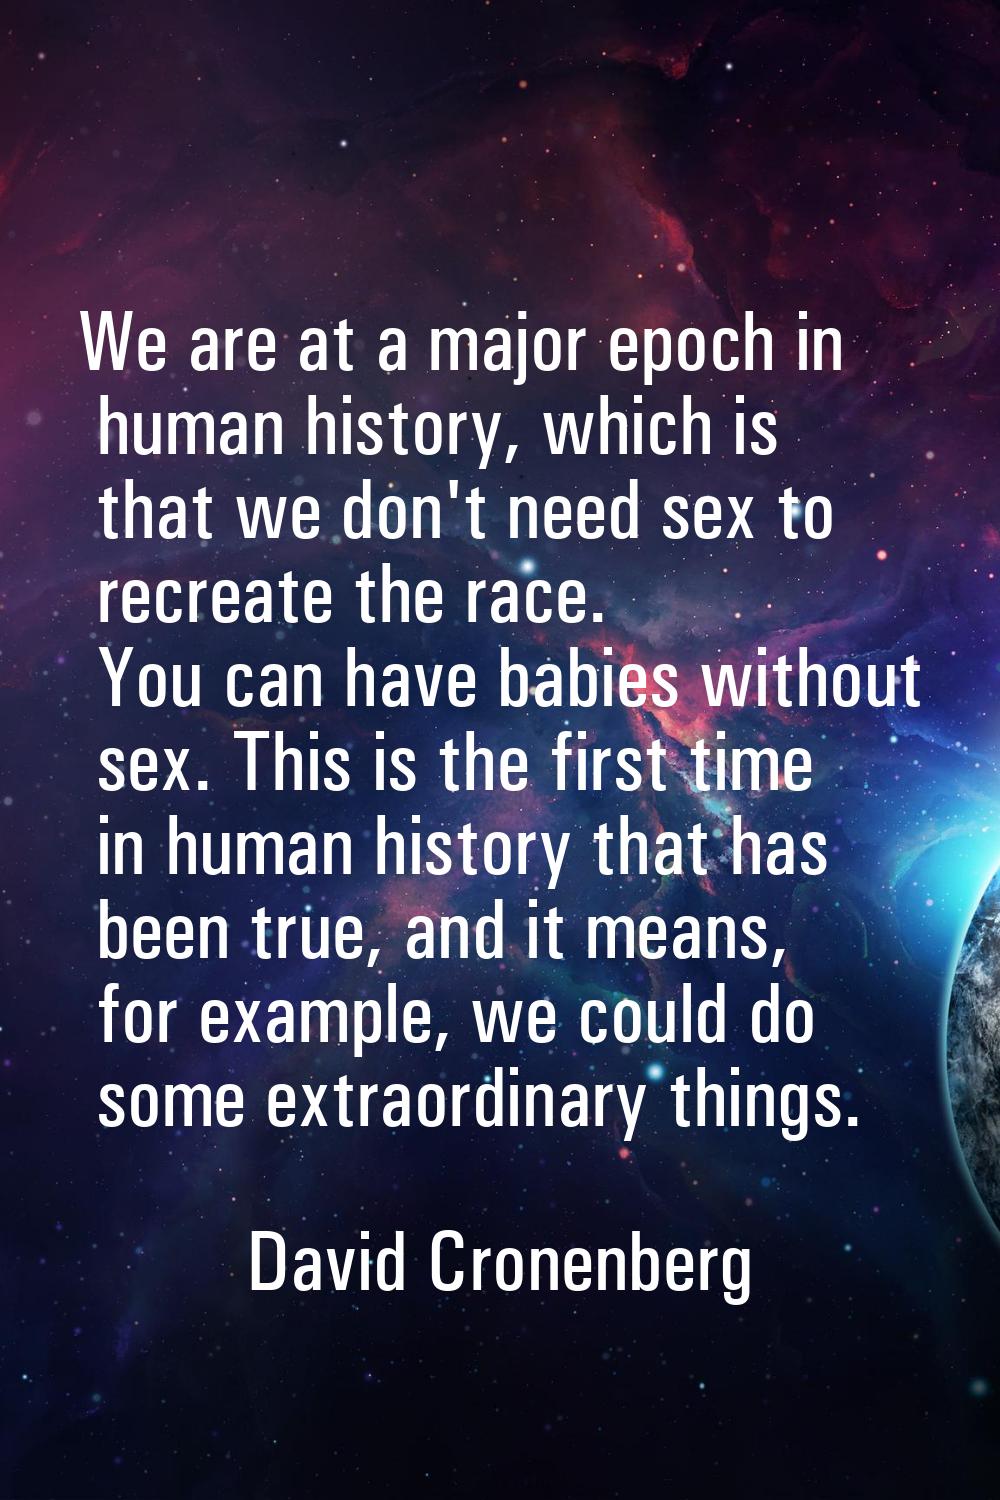 We are at a major epoch in human history, which is that we don't need sex to recreate the race. You